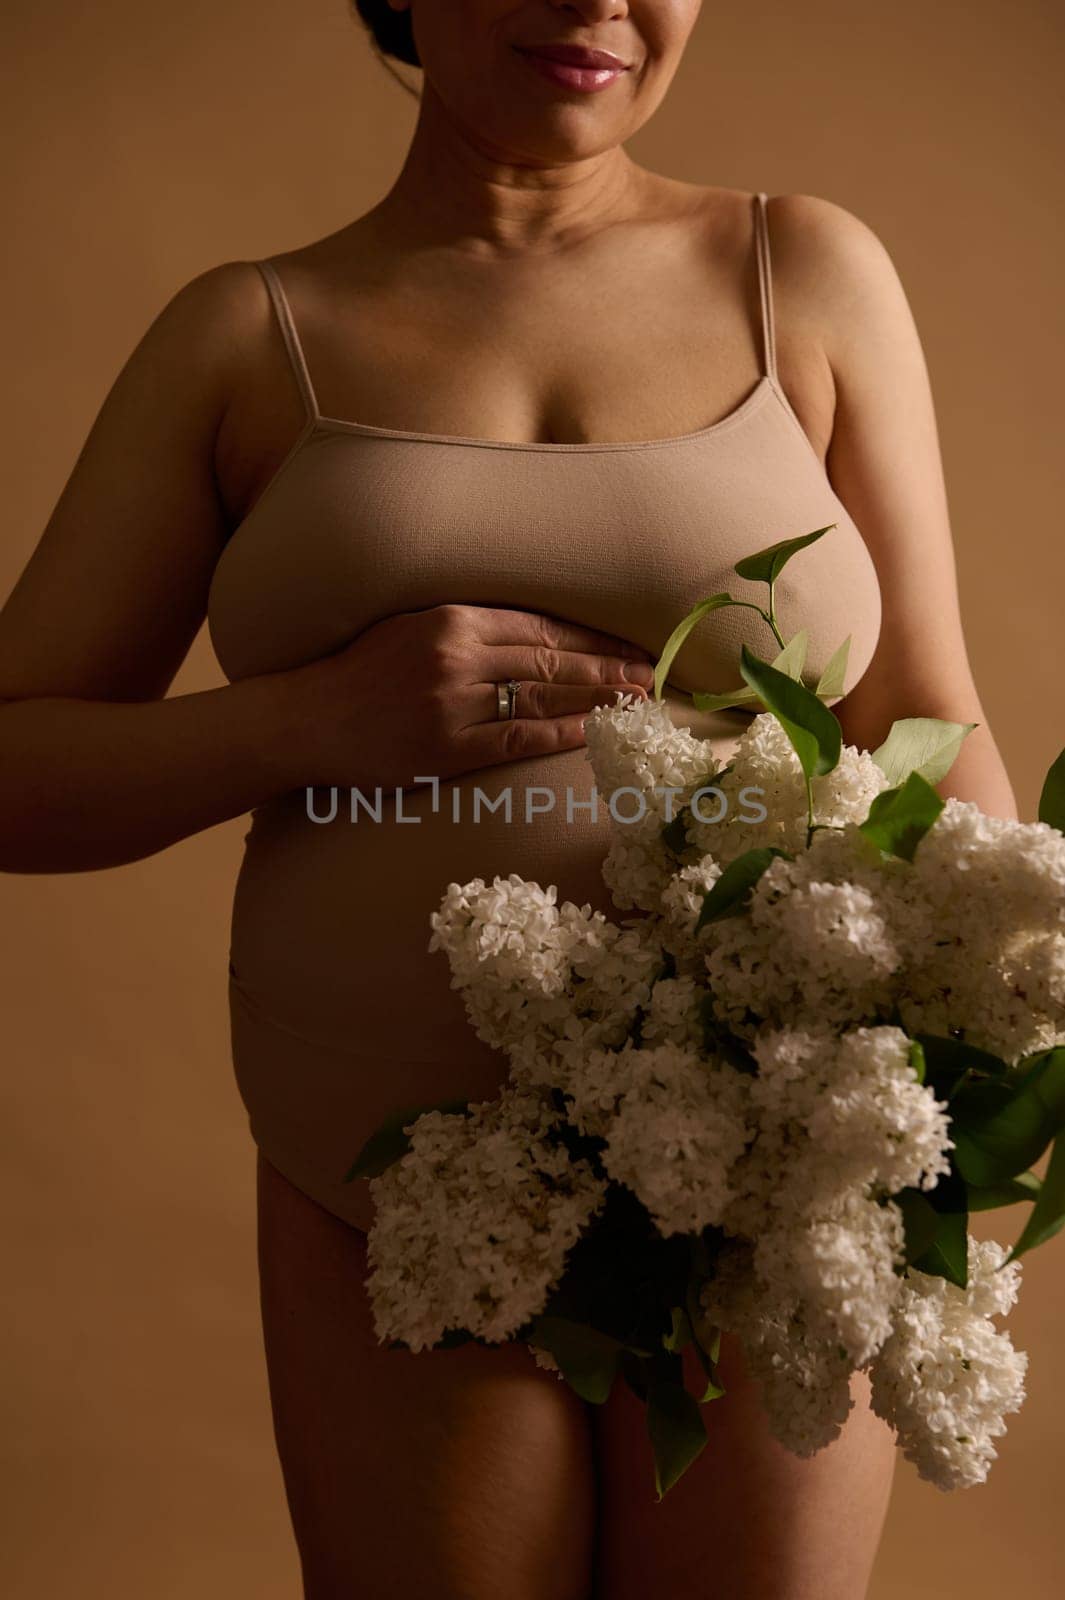 Midsection of pregnant woman holding a bouquet of white lilac, posing over beige background with her hands on belly. The concept of healthy happy pregnancy and maternity. Women's health and fertility